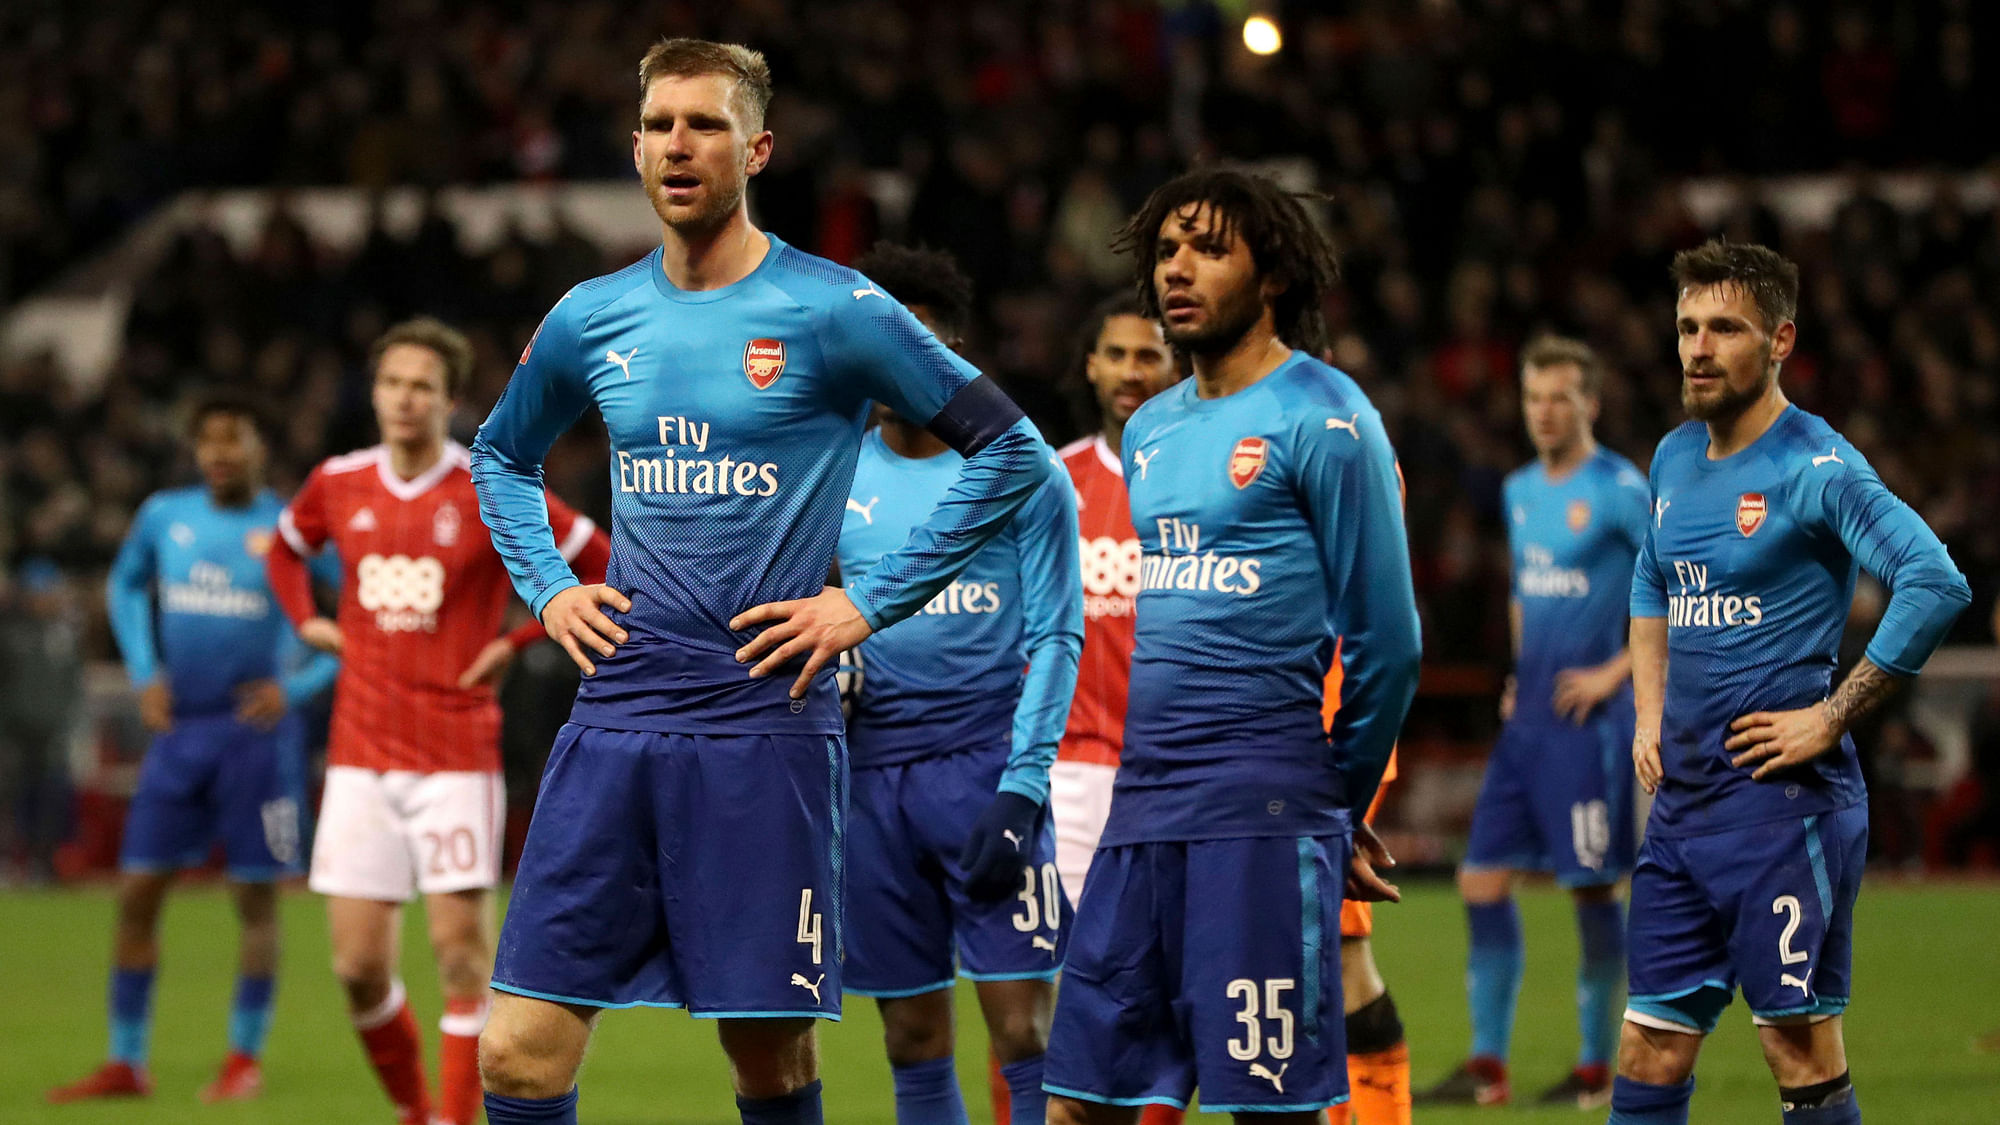 Arsenal’s Per Mertesacker and Mohamed Elneny are dejected during the FA Cup match against Nottingham Forest.